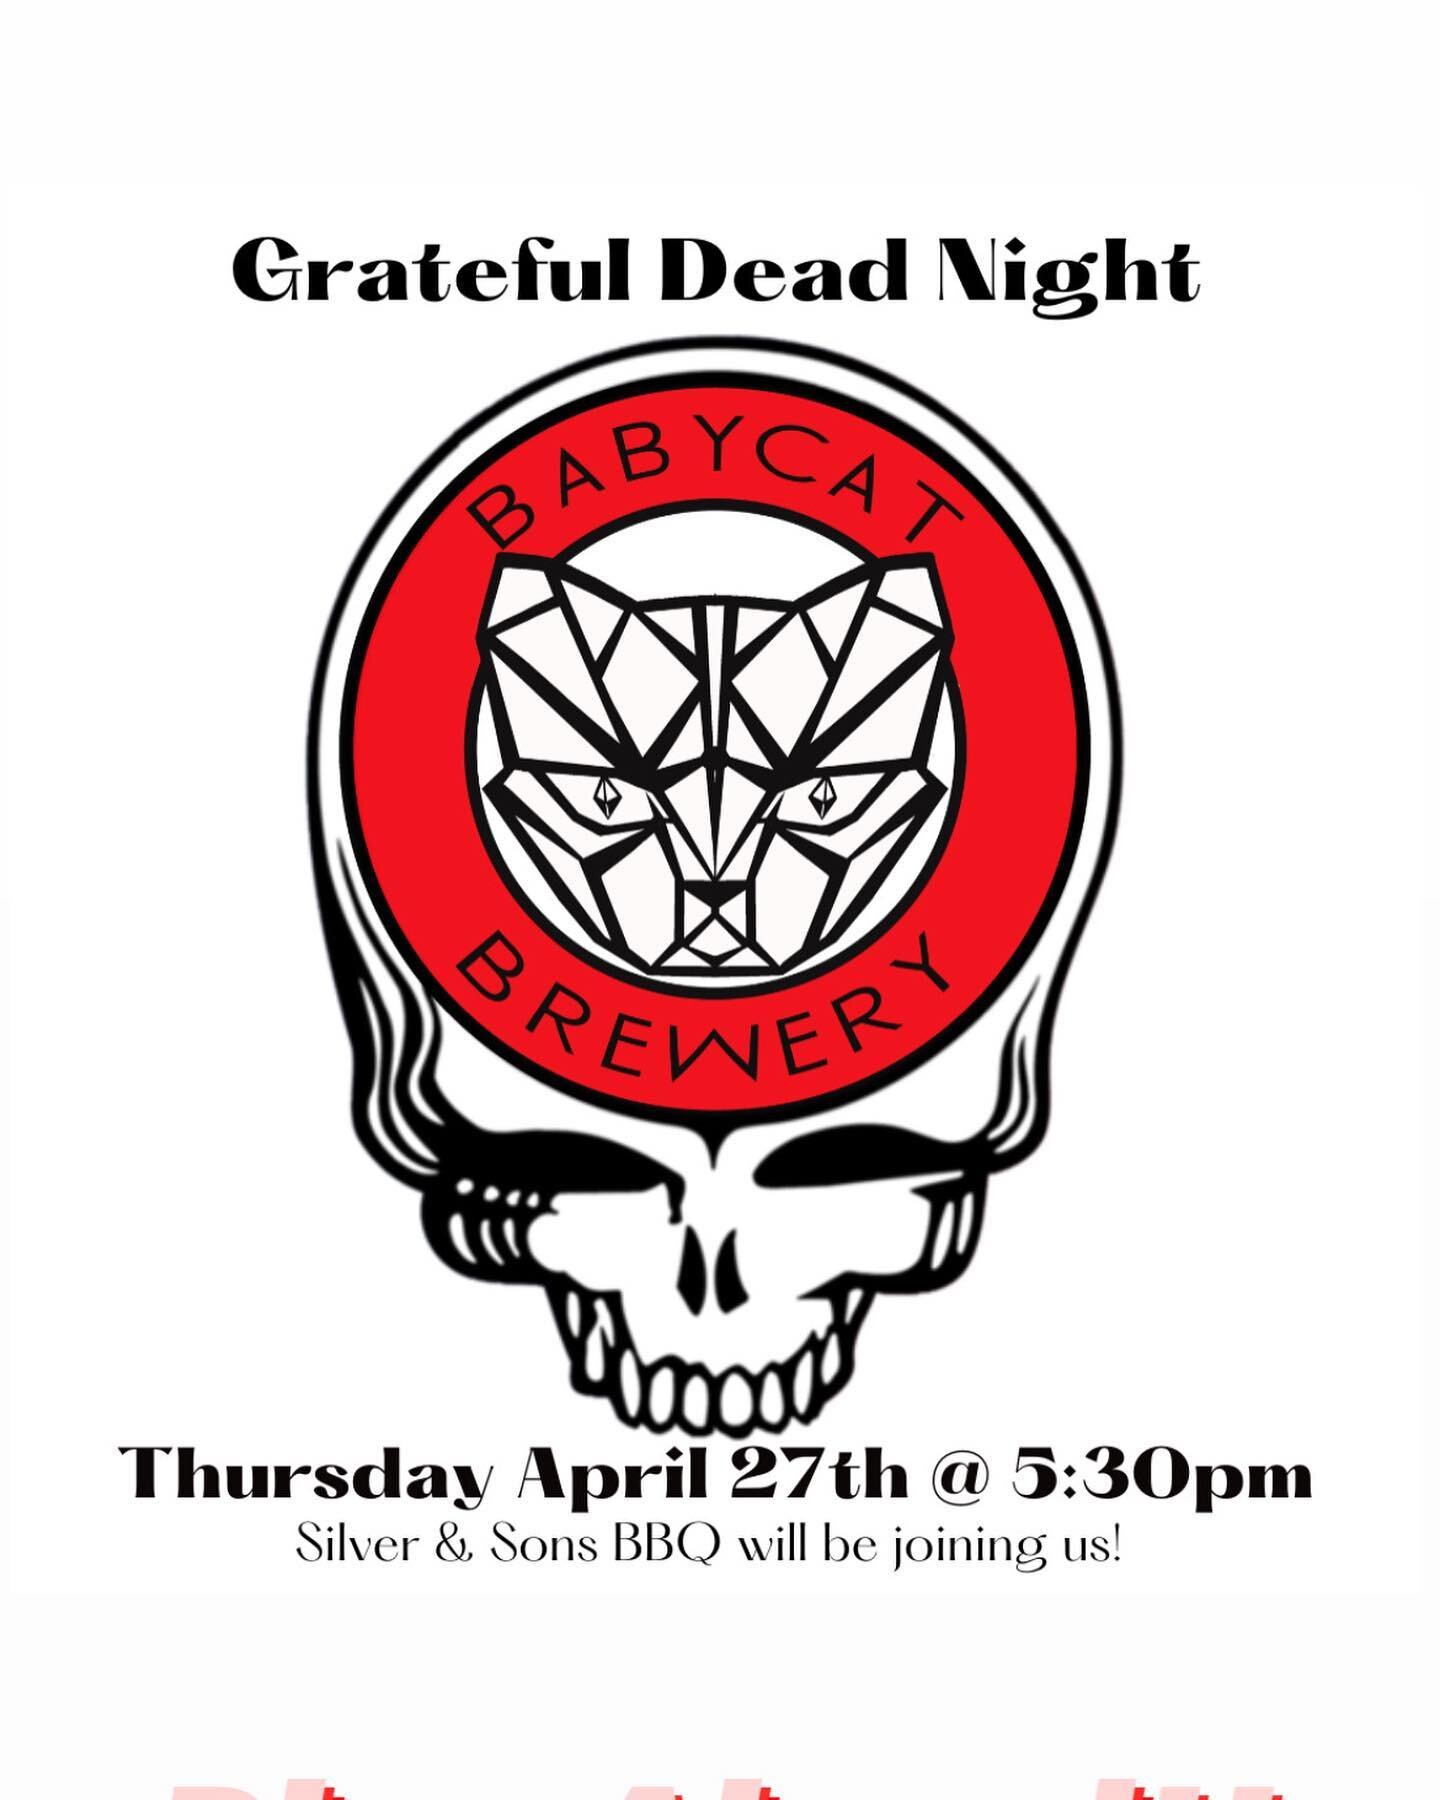 This Thursday 4/27! We&rsquo;ve loved meeting all our local Deadhead friends &amp; can&rsquo;t wait to see you again!❤️💙❤️💙
@silverandsonsbbq